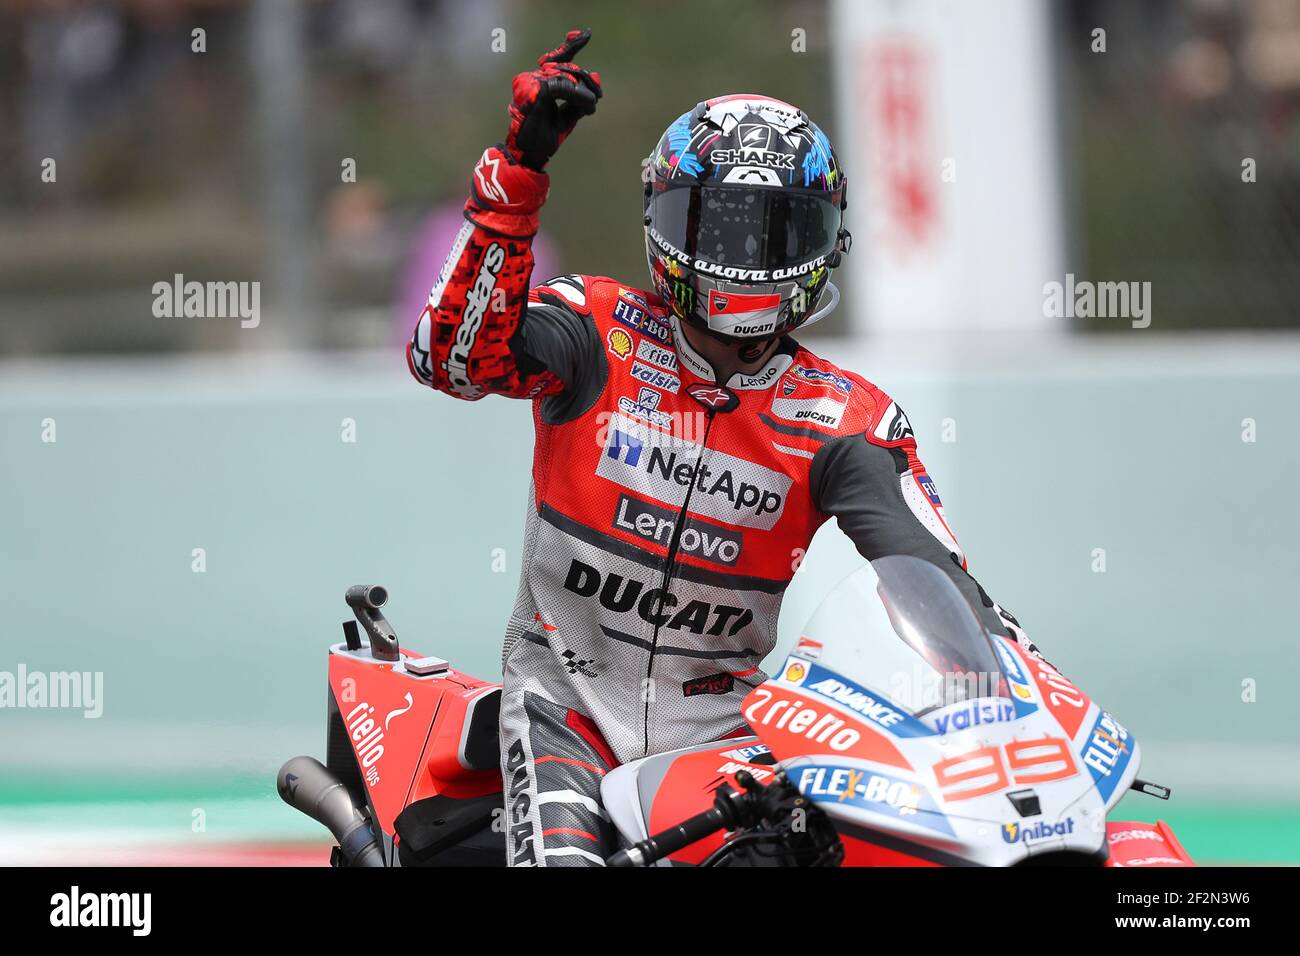 Jorge LORENZO of Spain and Ducati Team celebrates victory during Moto GP  race at The Catalunya